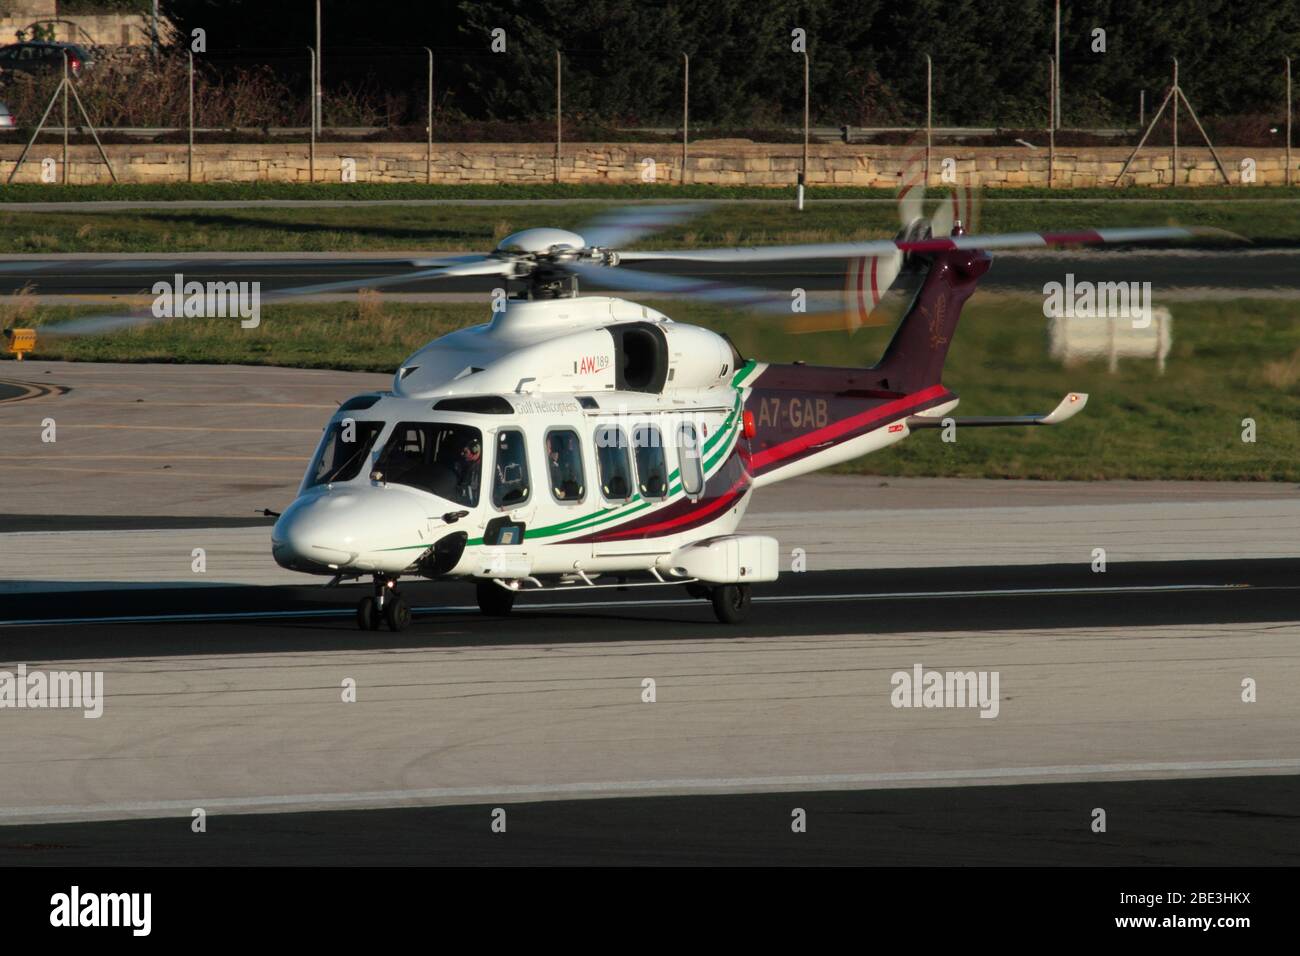 Helicopter taxiing. Gulf Helicopters Leonardo AW189 on the runway after landing at Malta International Airport. Modern commercial air transport. Stock Photo